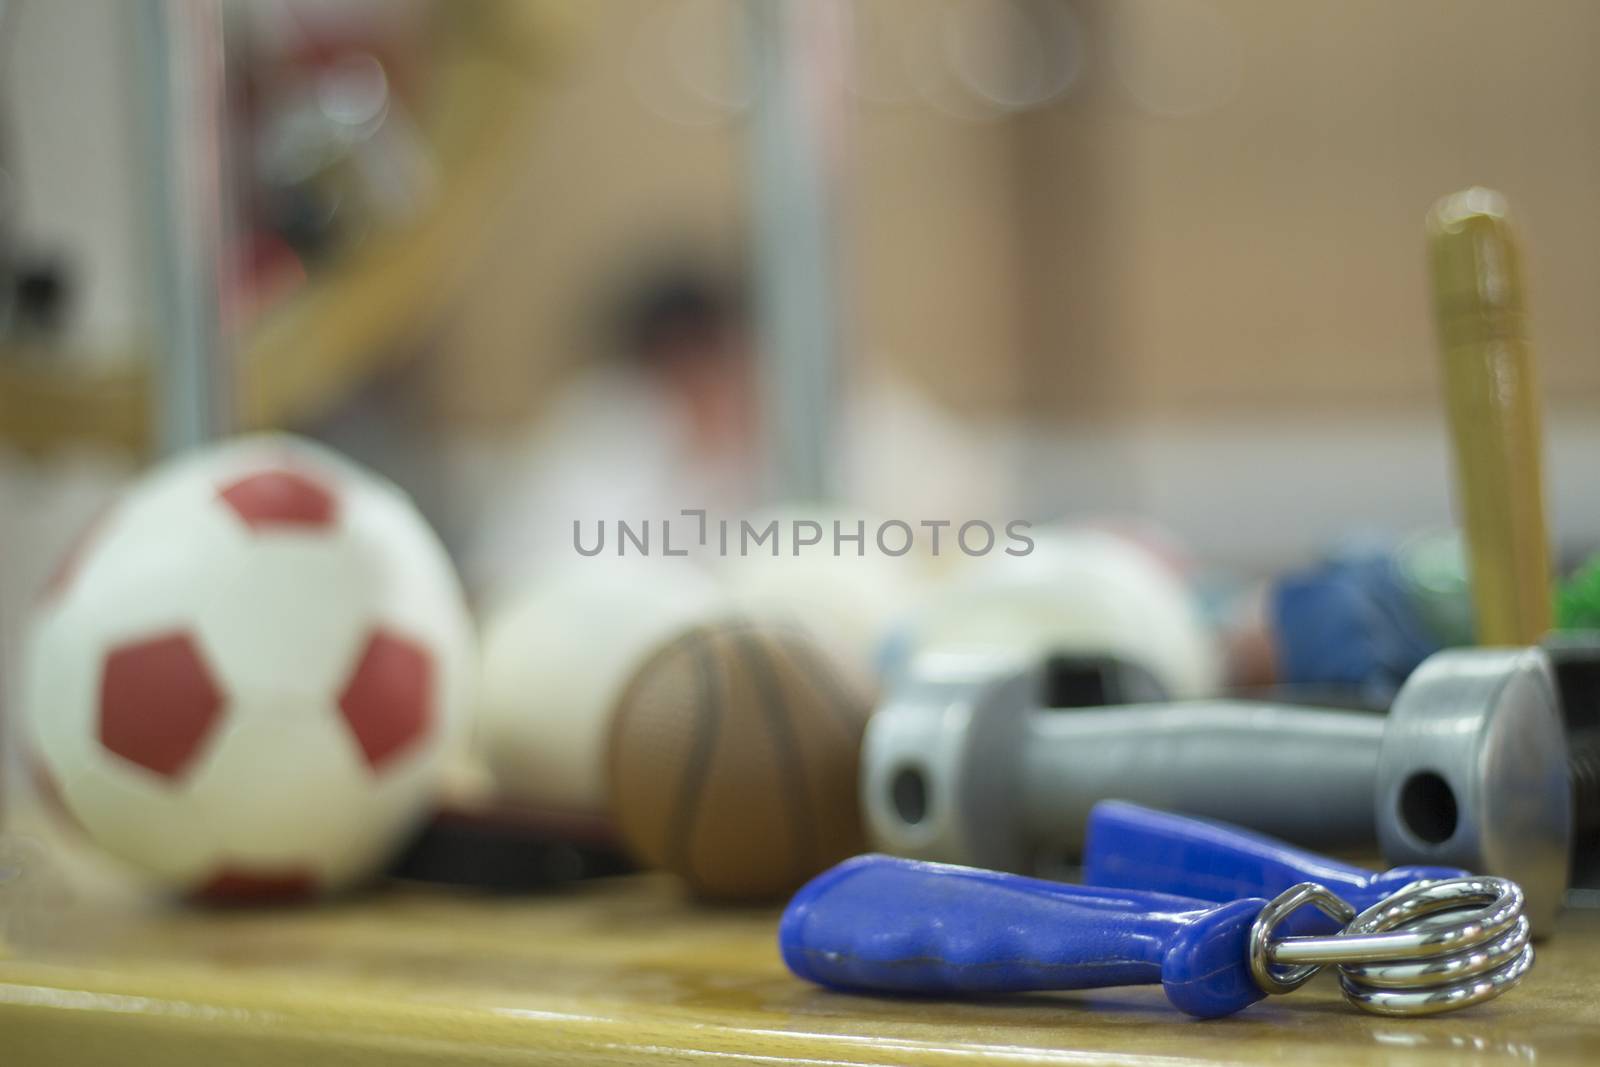 Hand exerciser, mini football, mini basketball, dumbell weight and other physiotherapy rehabilitation treatment equipment for pateint recovery from orthopedic surgery in a hospital clinic physiotherapy room on a wooden table.